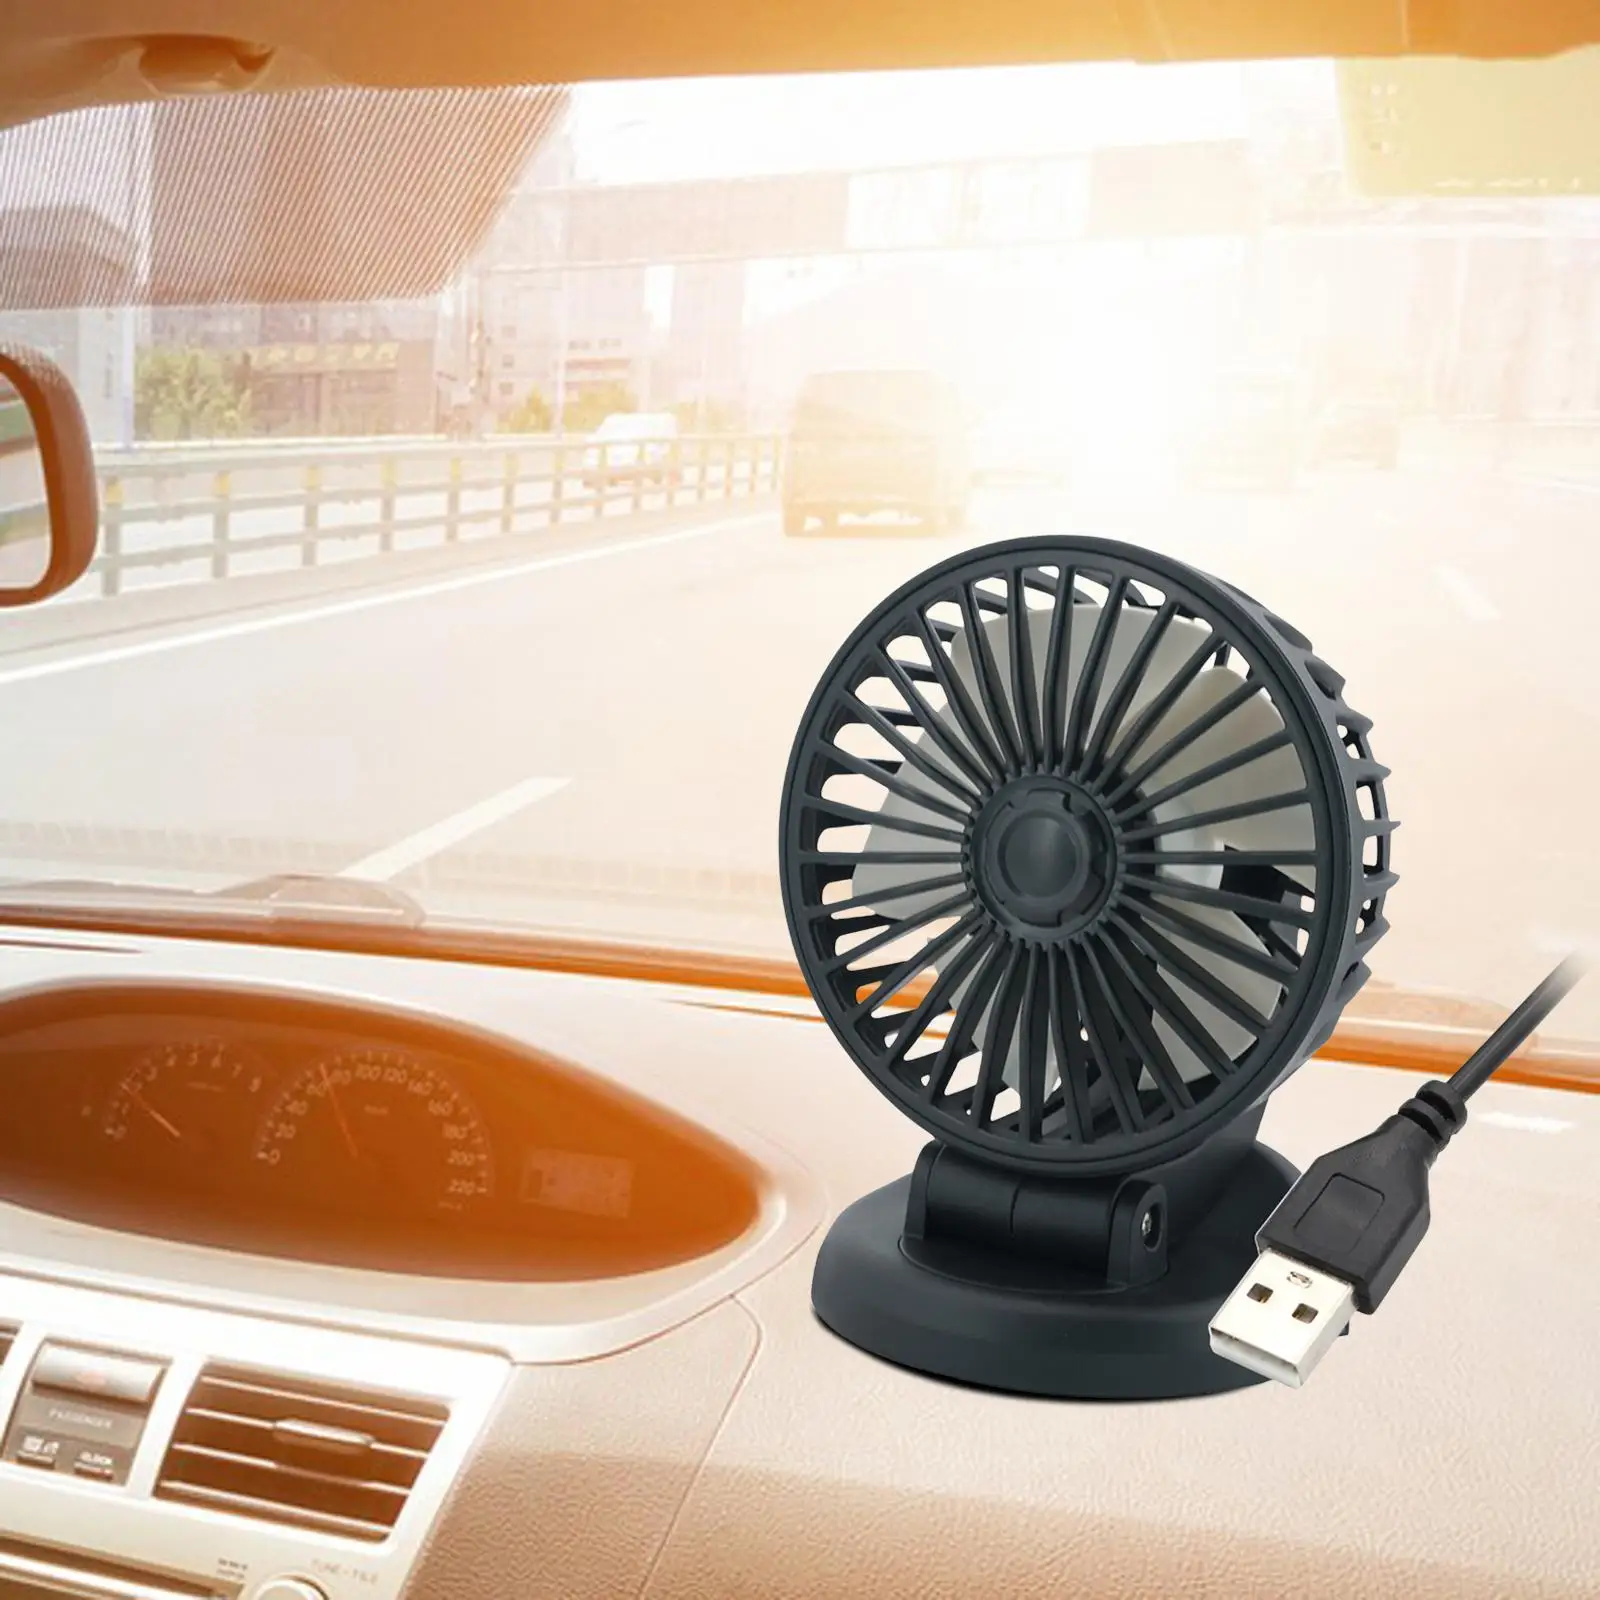 Rotatable Portable Fan for Car 2 Speeds Adjustable Air Circulation Fan Car Cooling Fan for Boat RV Vehicle SUV Truck